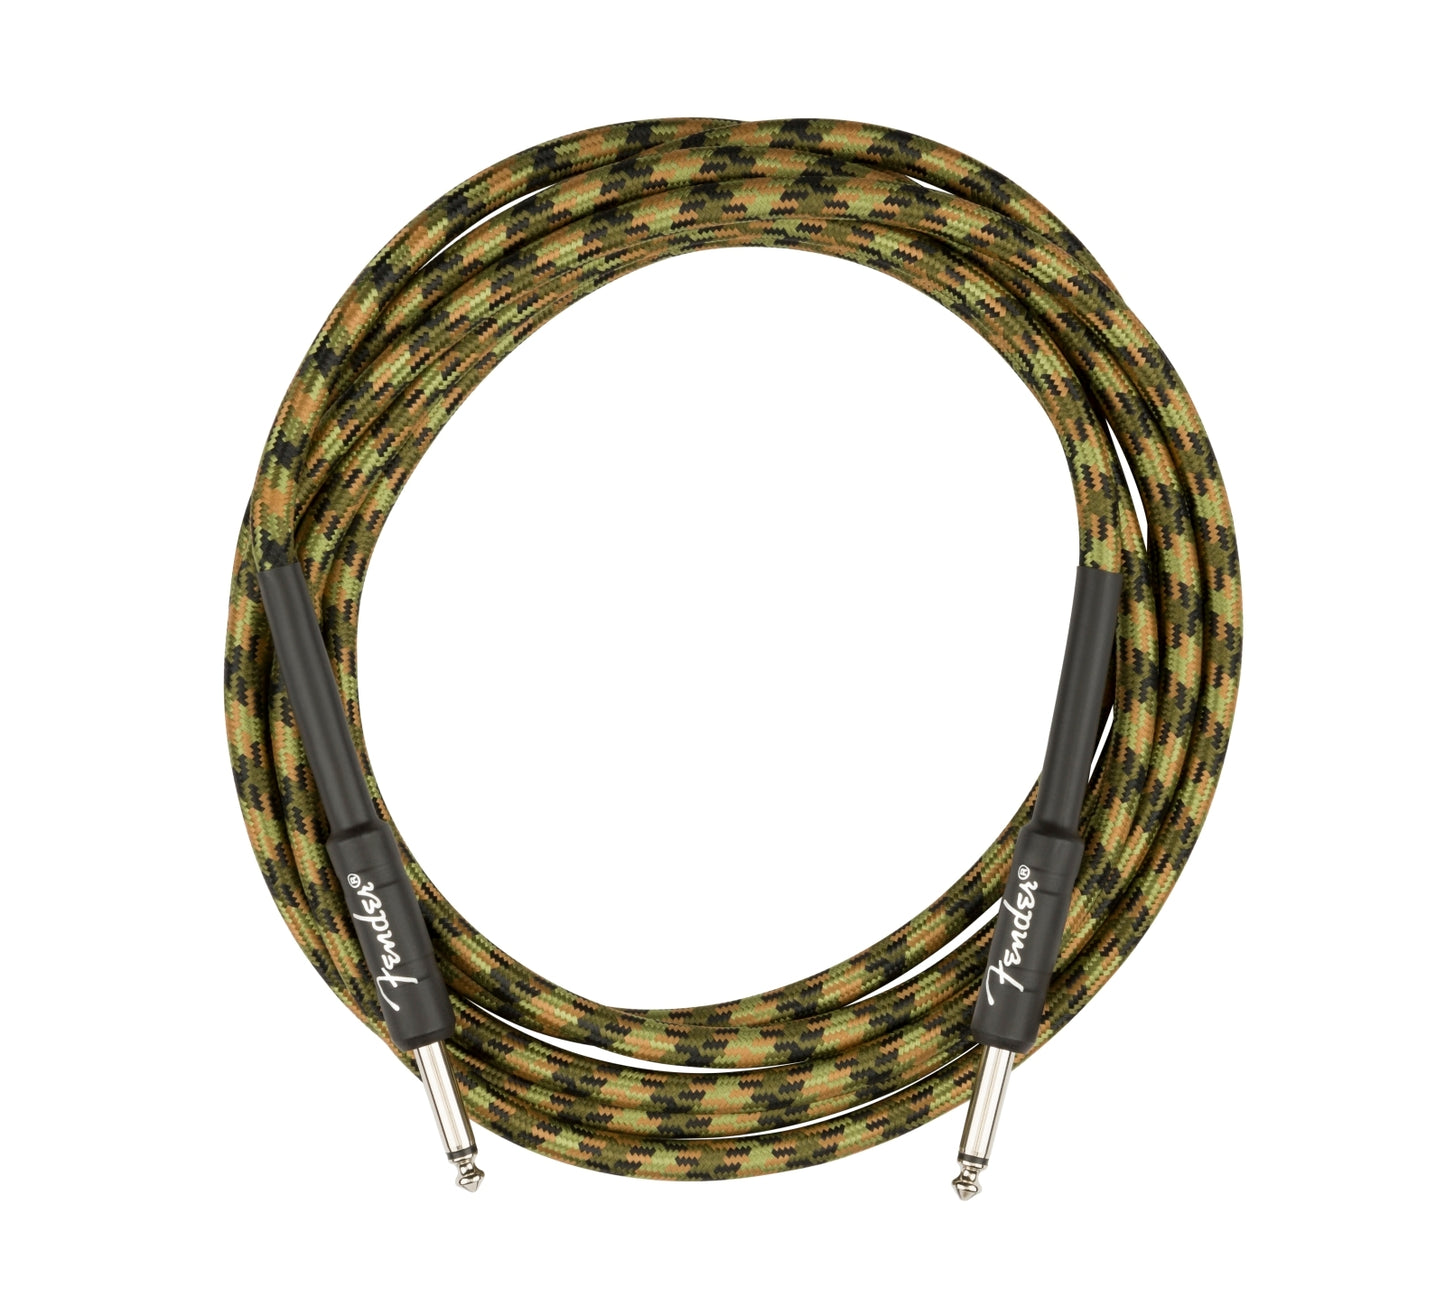 Fender Professional Series Camo Instrument Cable 18.6ft Straight-Straight with Nickel-plated 1/4" Connectors, 22AWG, Camouflage (Desert, Winter, Woodland)